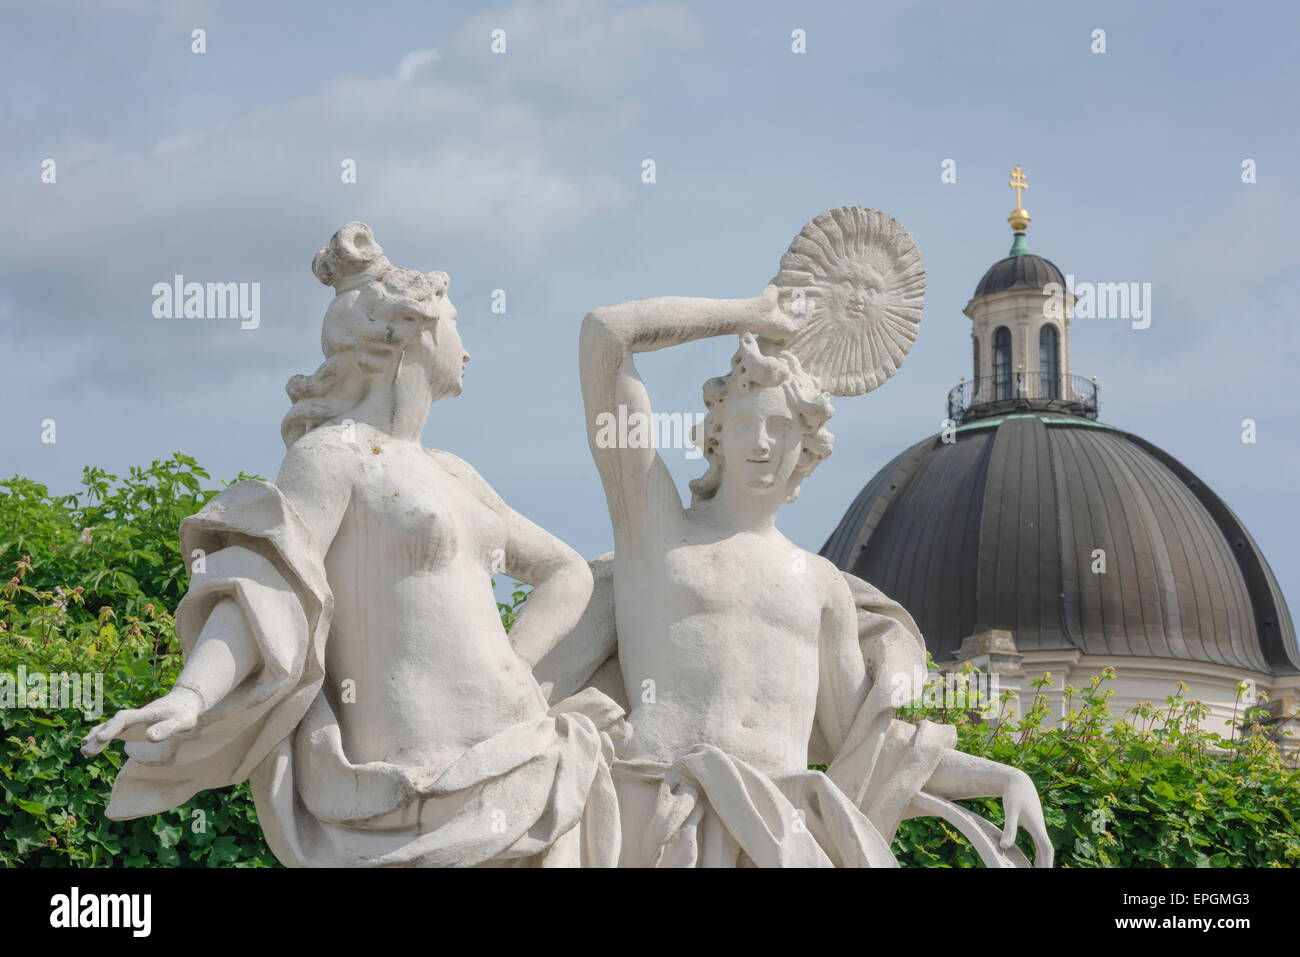 Classical statue, two Greco-Roman styled statues (Artemis and Apollo) sited in the formal gardens of the Schloss Belvedere in Vienna, Wien, Austria. Stock Photo